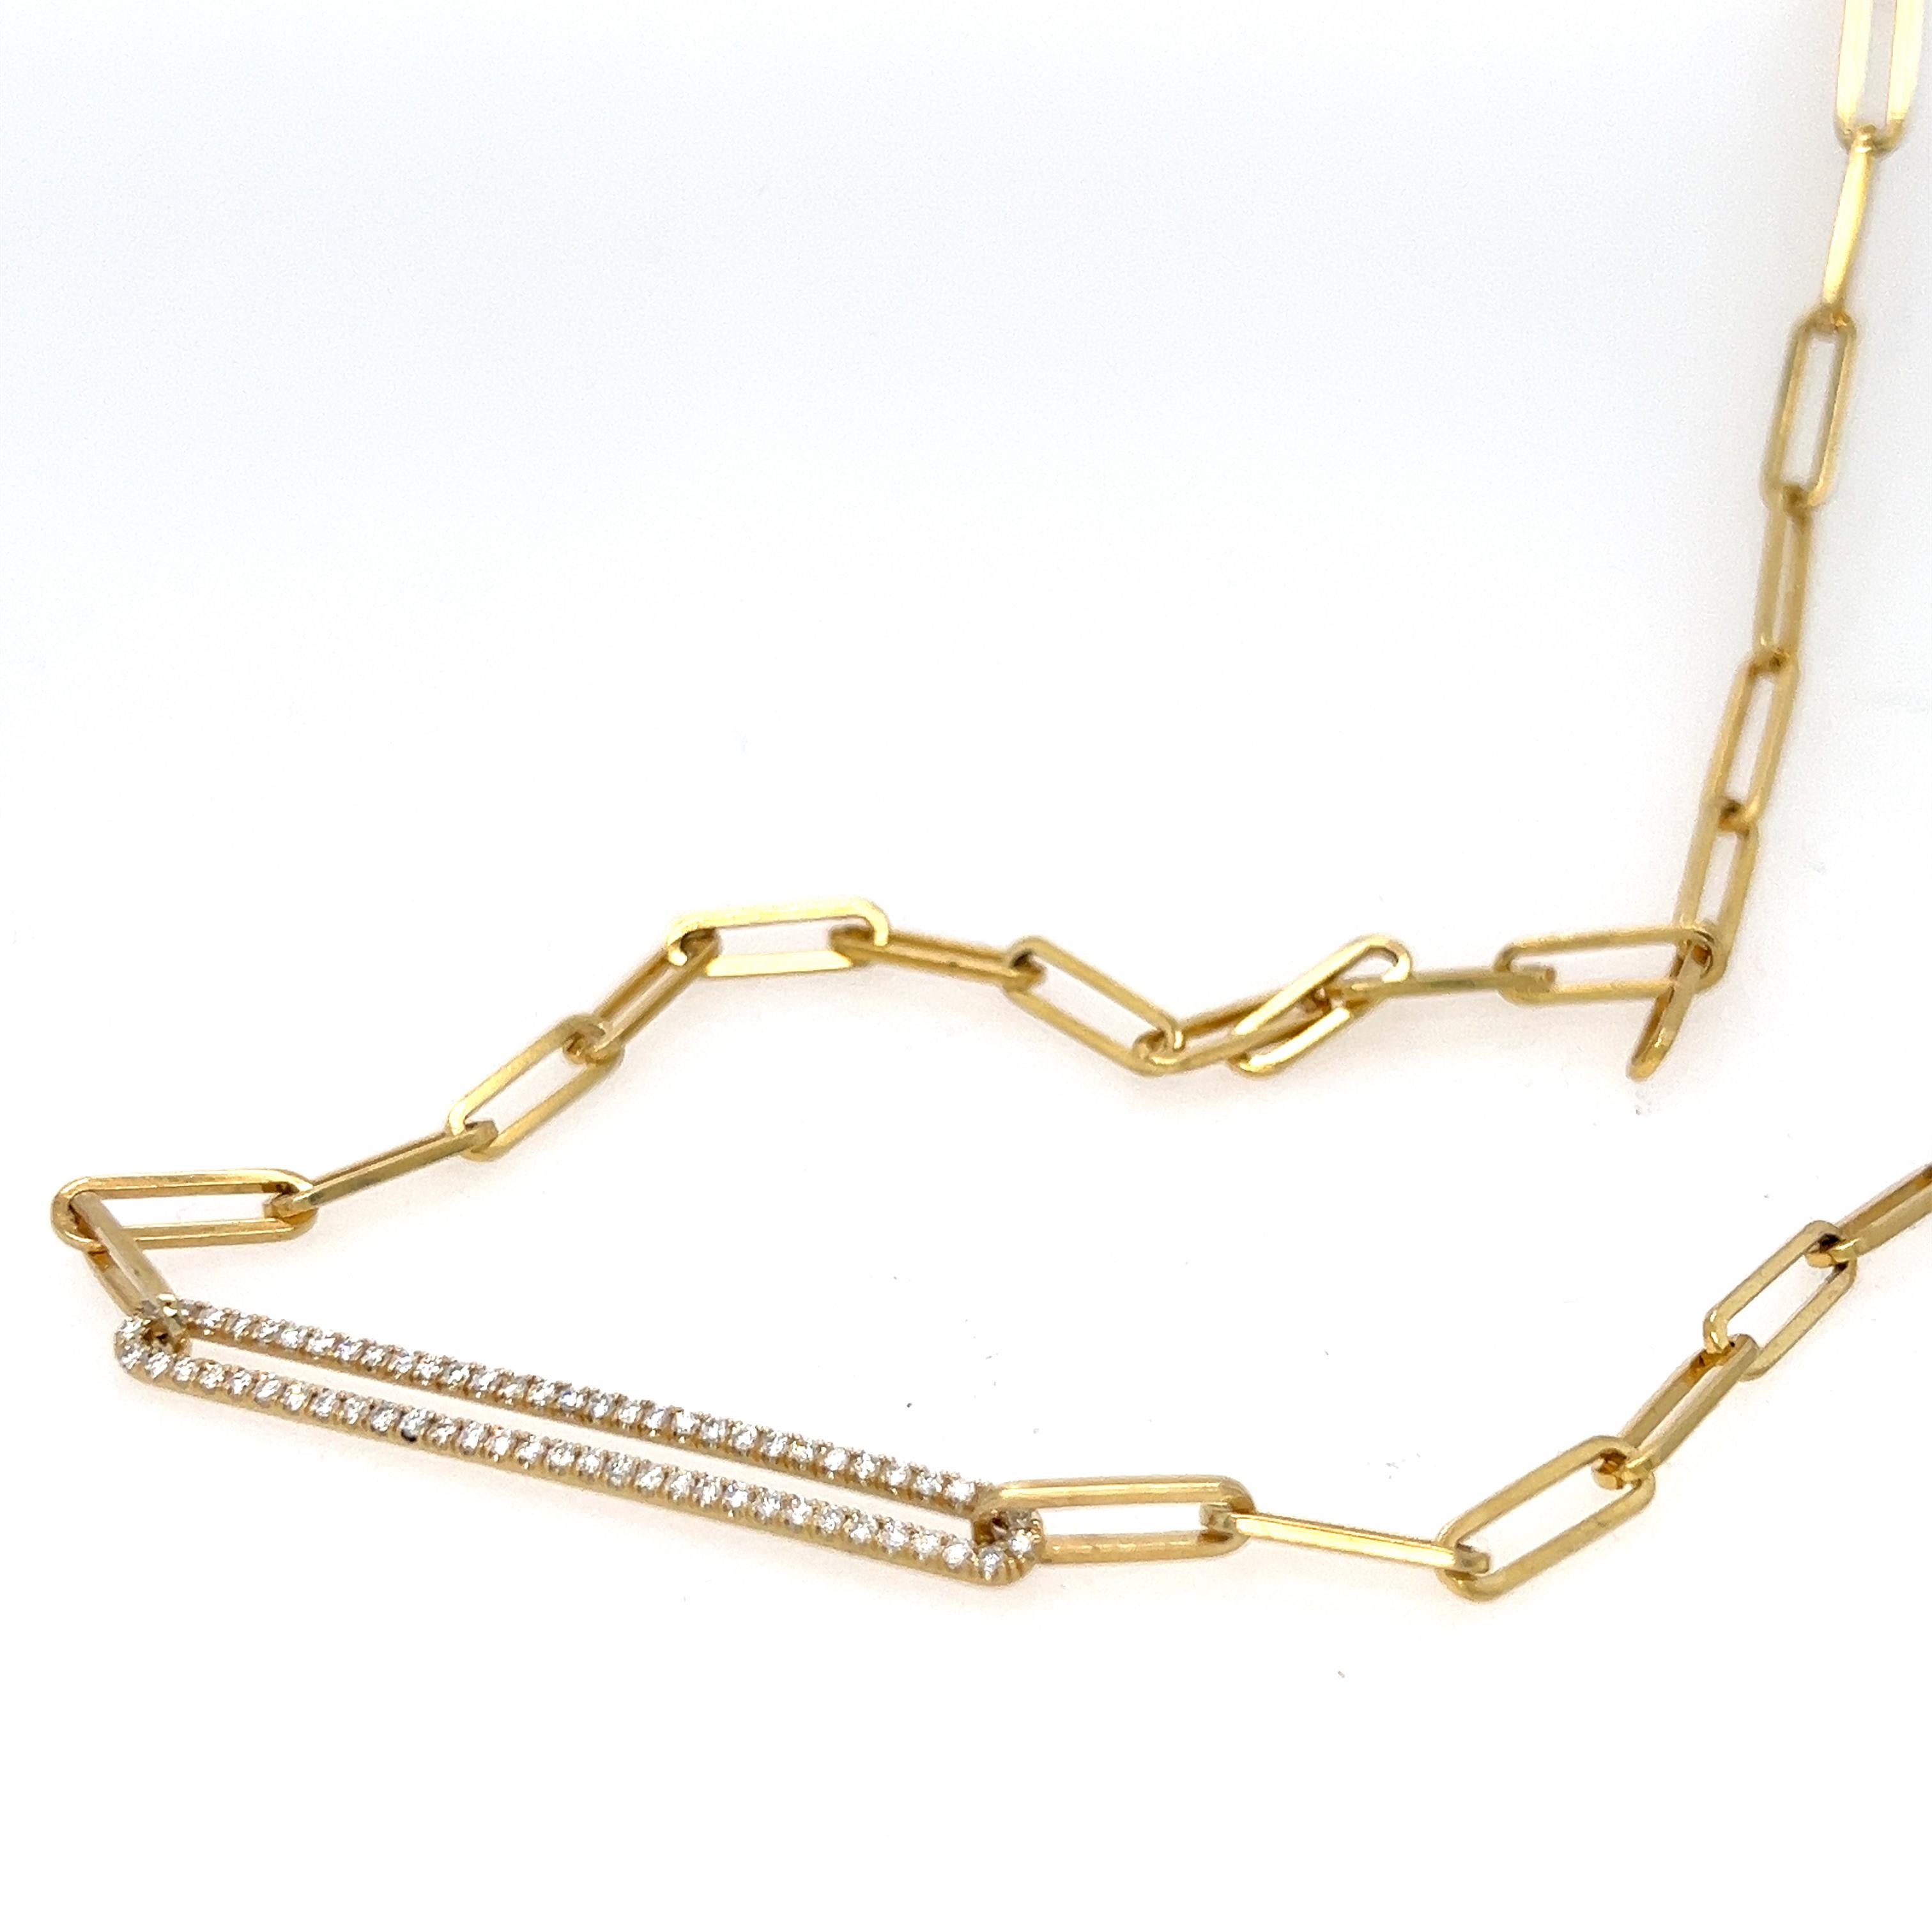 Beautiful solid gold paperclip chain necklace with a centerpiece for natural diamonds. 1/2 carat, F/VS1. Perfect on it's own or layering. 

Other Important Details: 
This necklace is 17 inches in length. 
The necklace solid 14K Yellow Gold. 
The